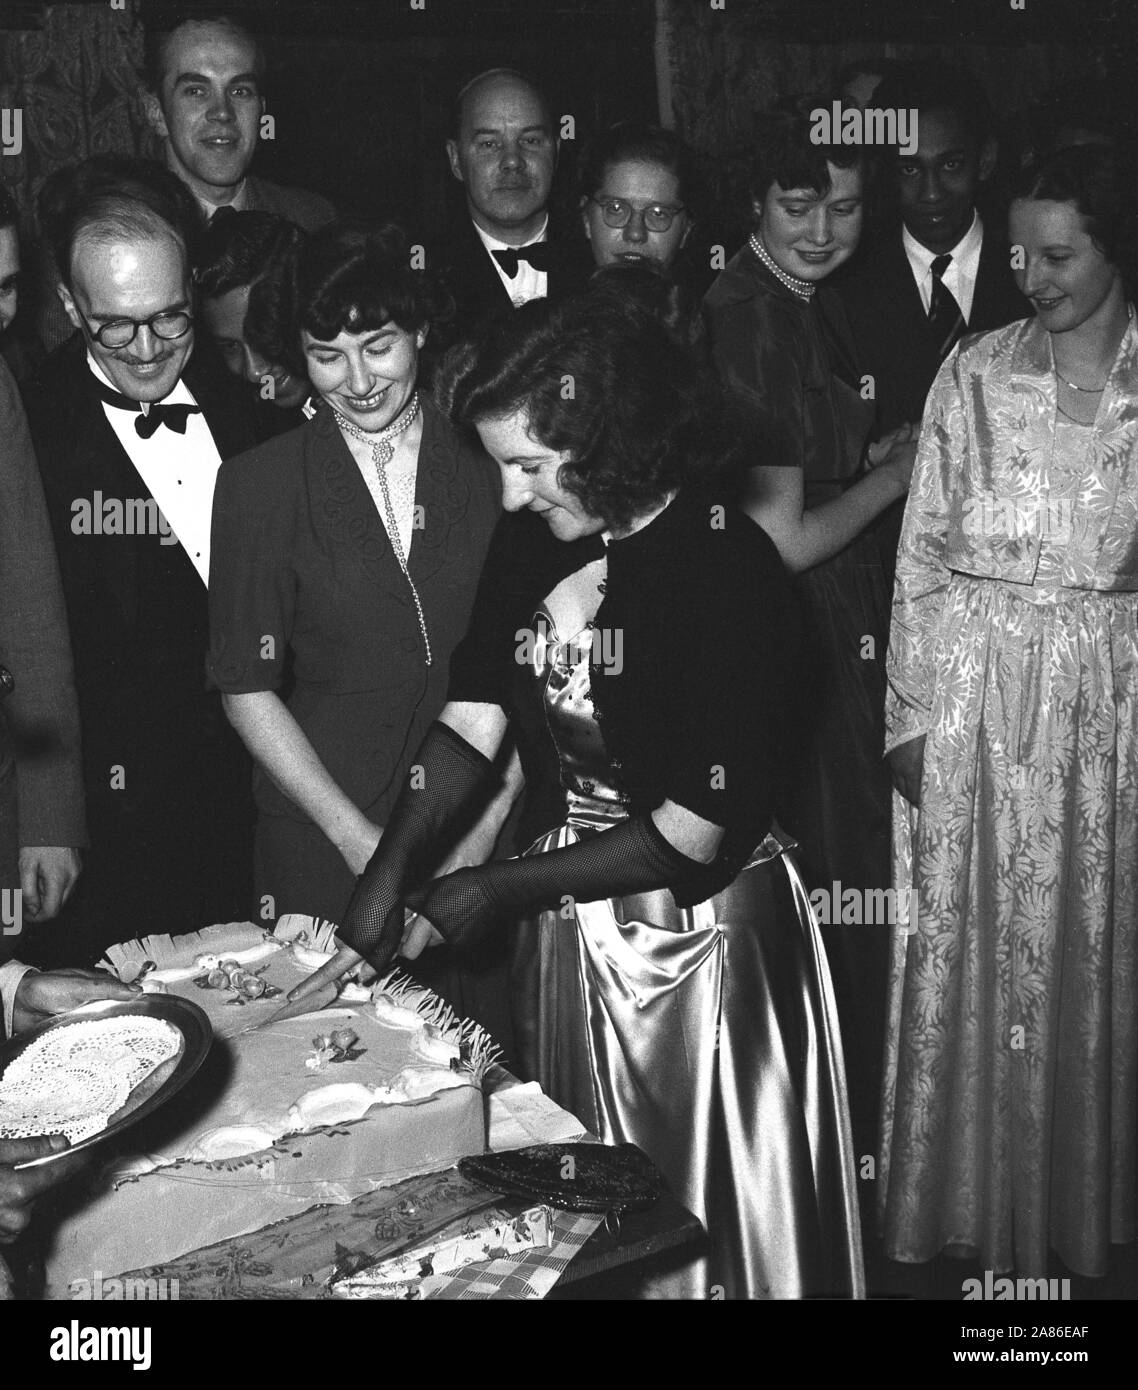 1950s, historical, adult guests in formal attire at a black tie birthday party, watch as a young lady wearing a shiny long dress, a shawl covering her shoulders and black lace armlets, uses both of her hands to cut a large cake. A metal dish awaits the first slice. Stock Photo